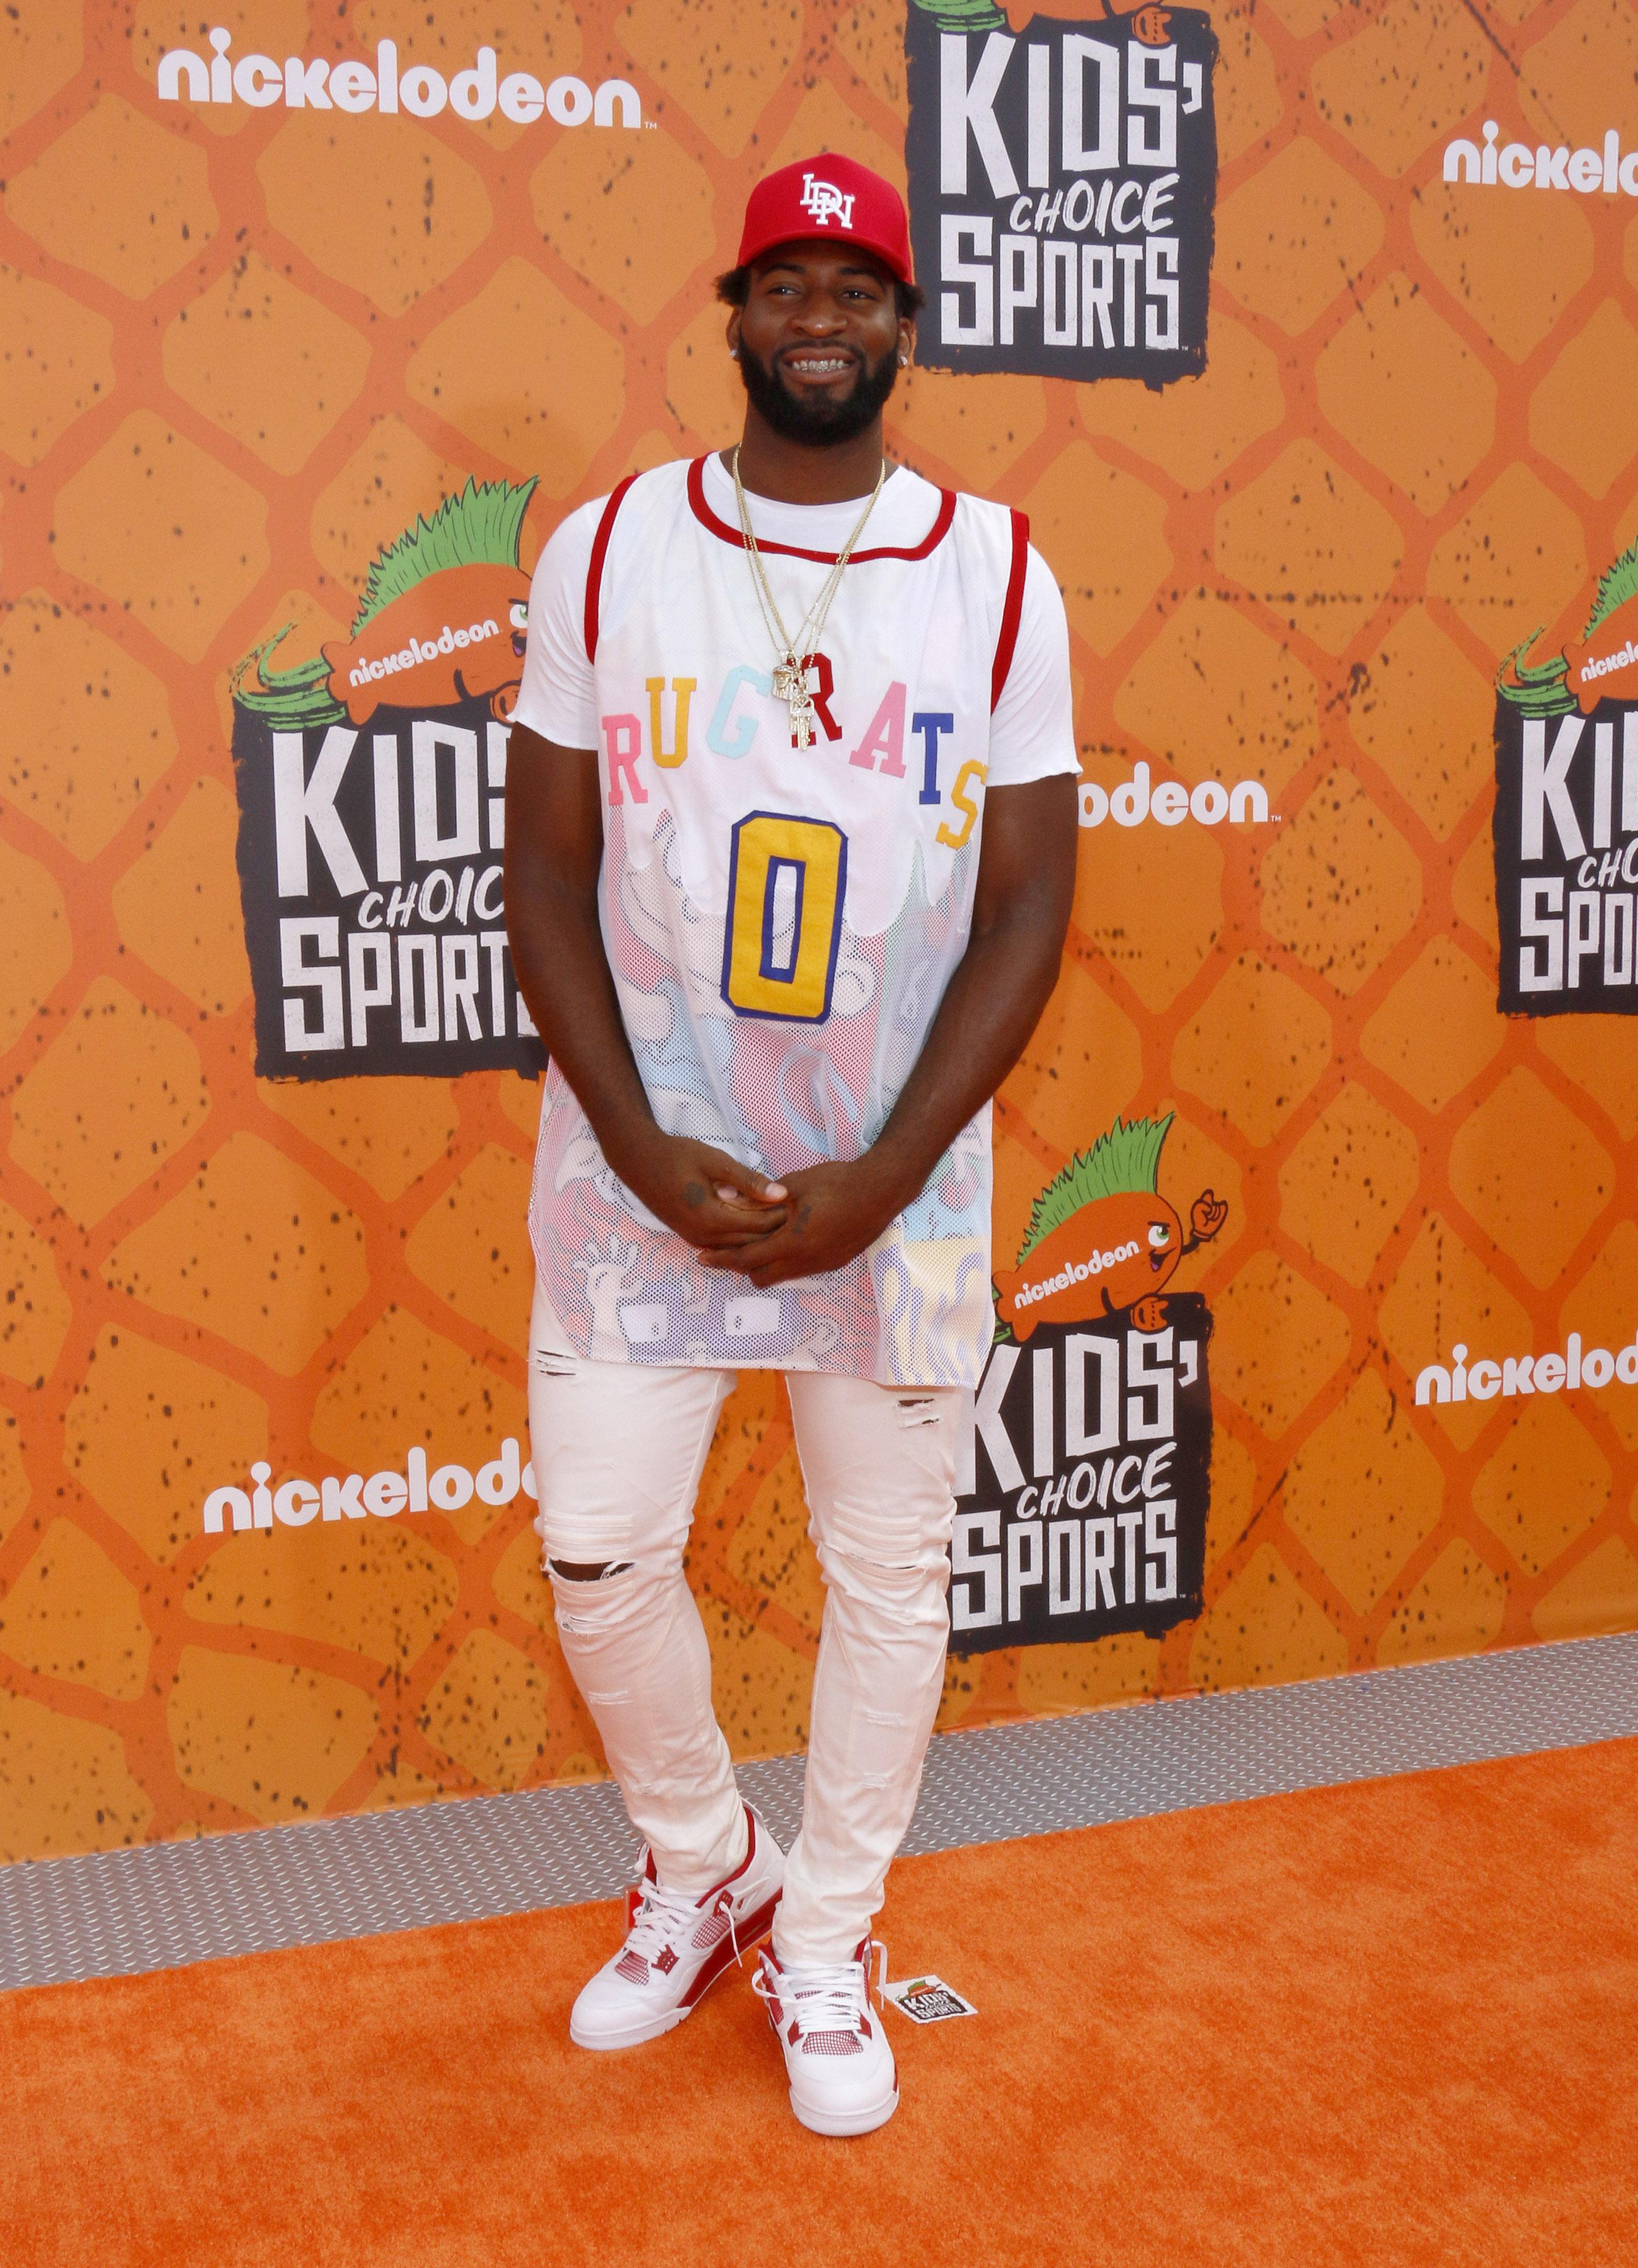 Andre Drummond at the Nickelodeon Kids' Choice Sports Awards 2016 held at the UCLA's Pauley Pavilion in Westwood, USA on July 14, 2016.